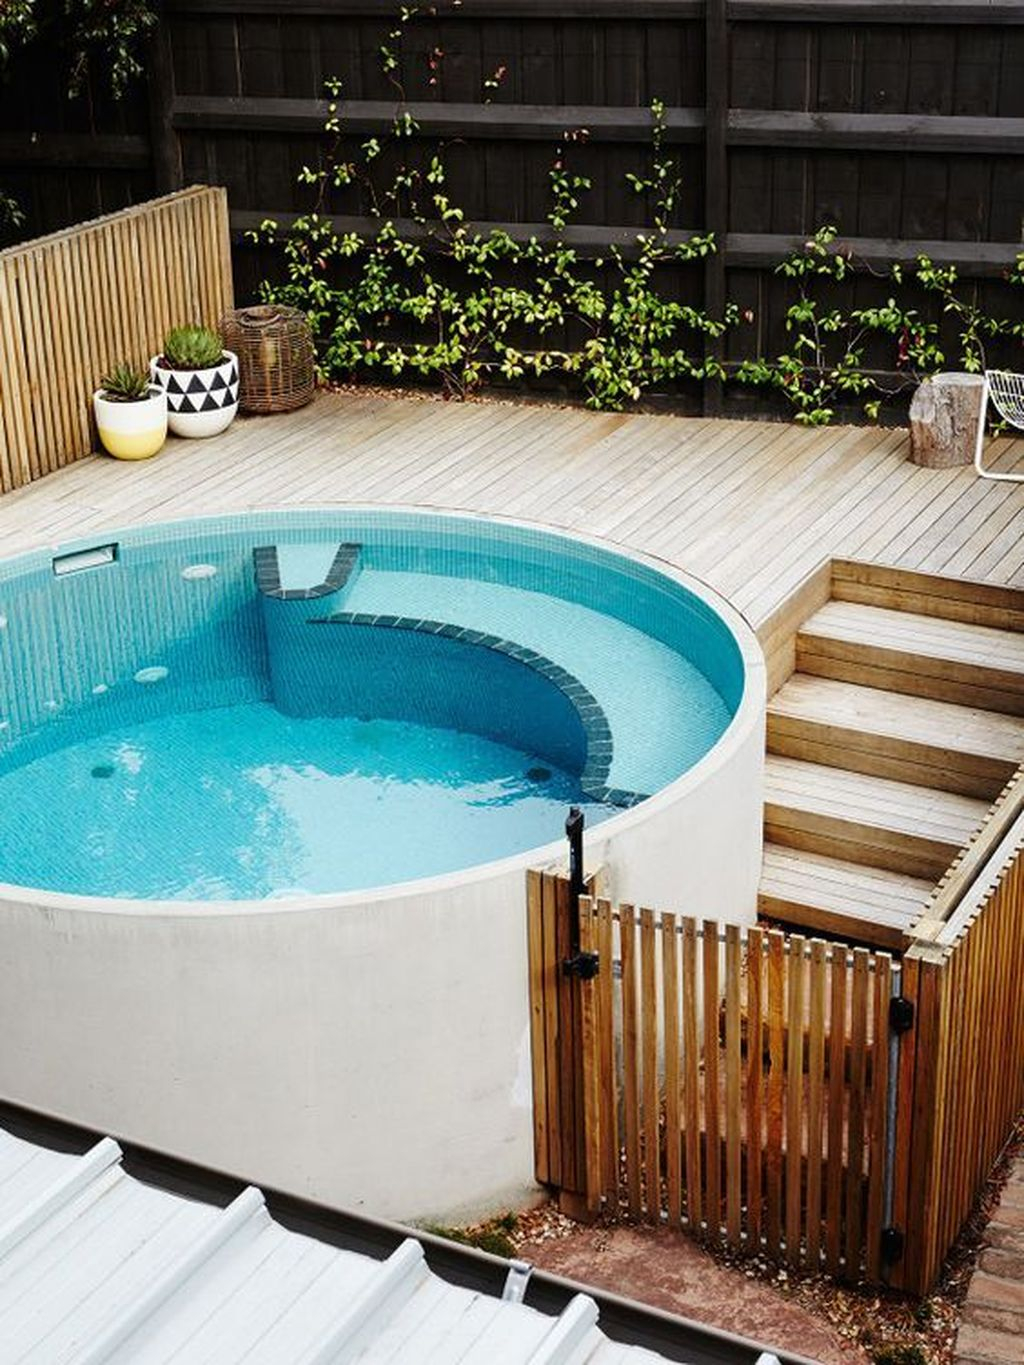 Cozy Swimming Pool Design Ideas For Your Home Backyard01